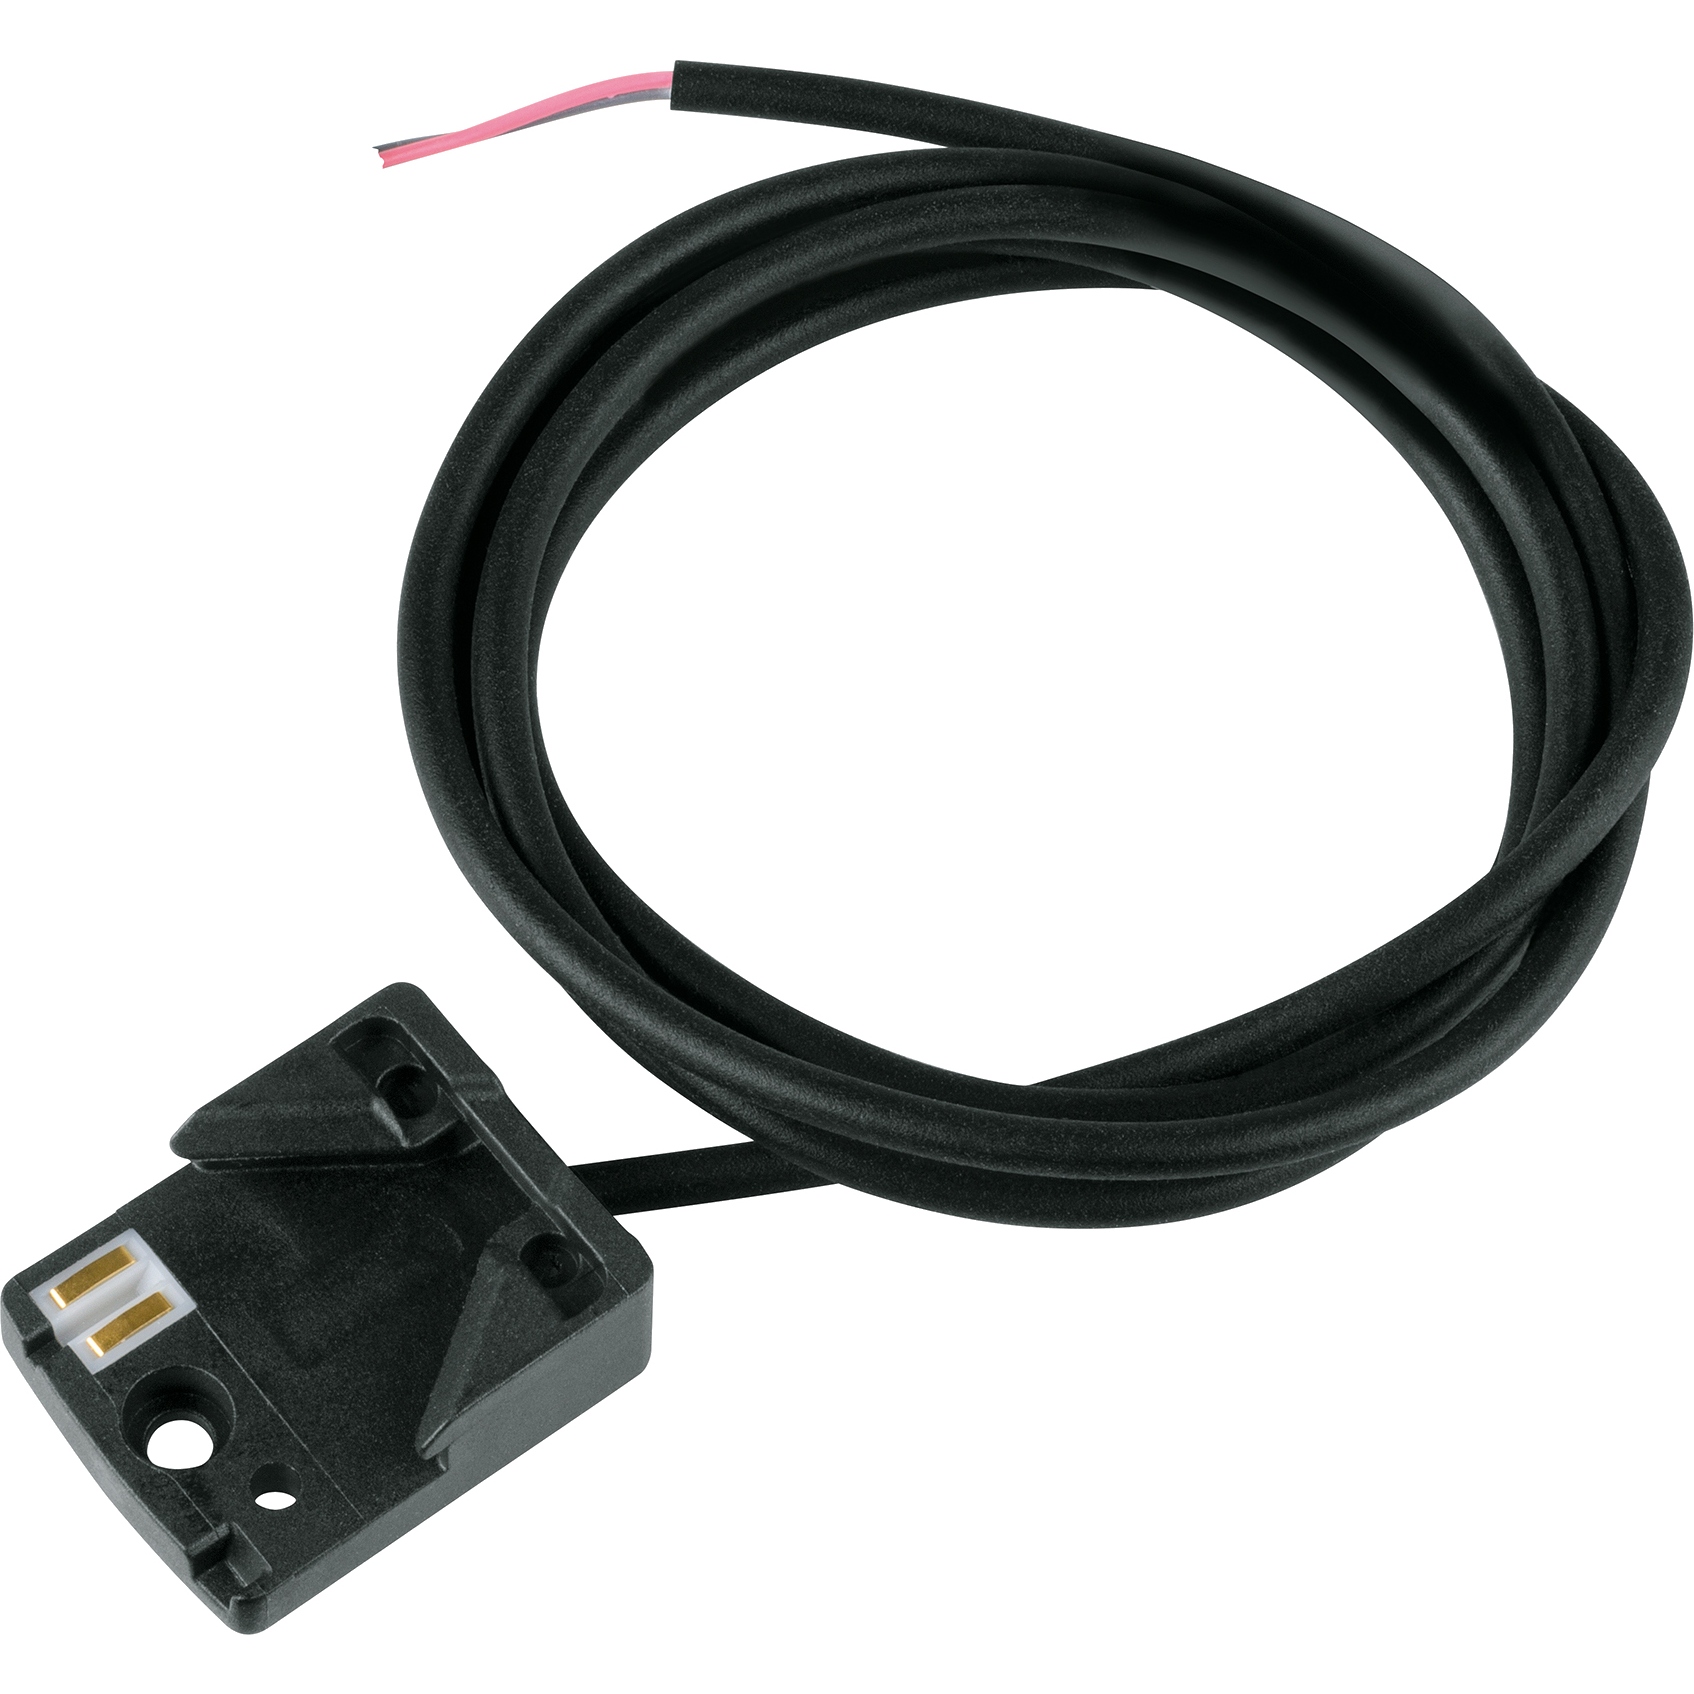 Image of MonkeyLink Interface Connect One4All REAR 800mm - Cable for E-Bike Rear Light